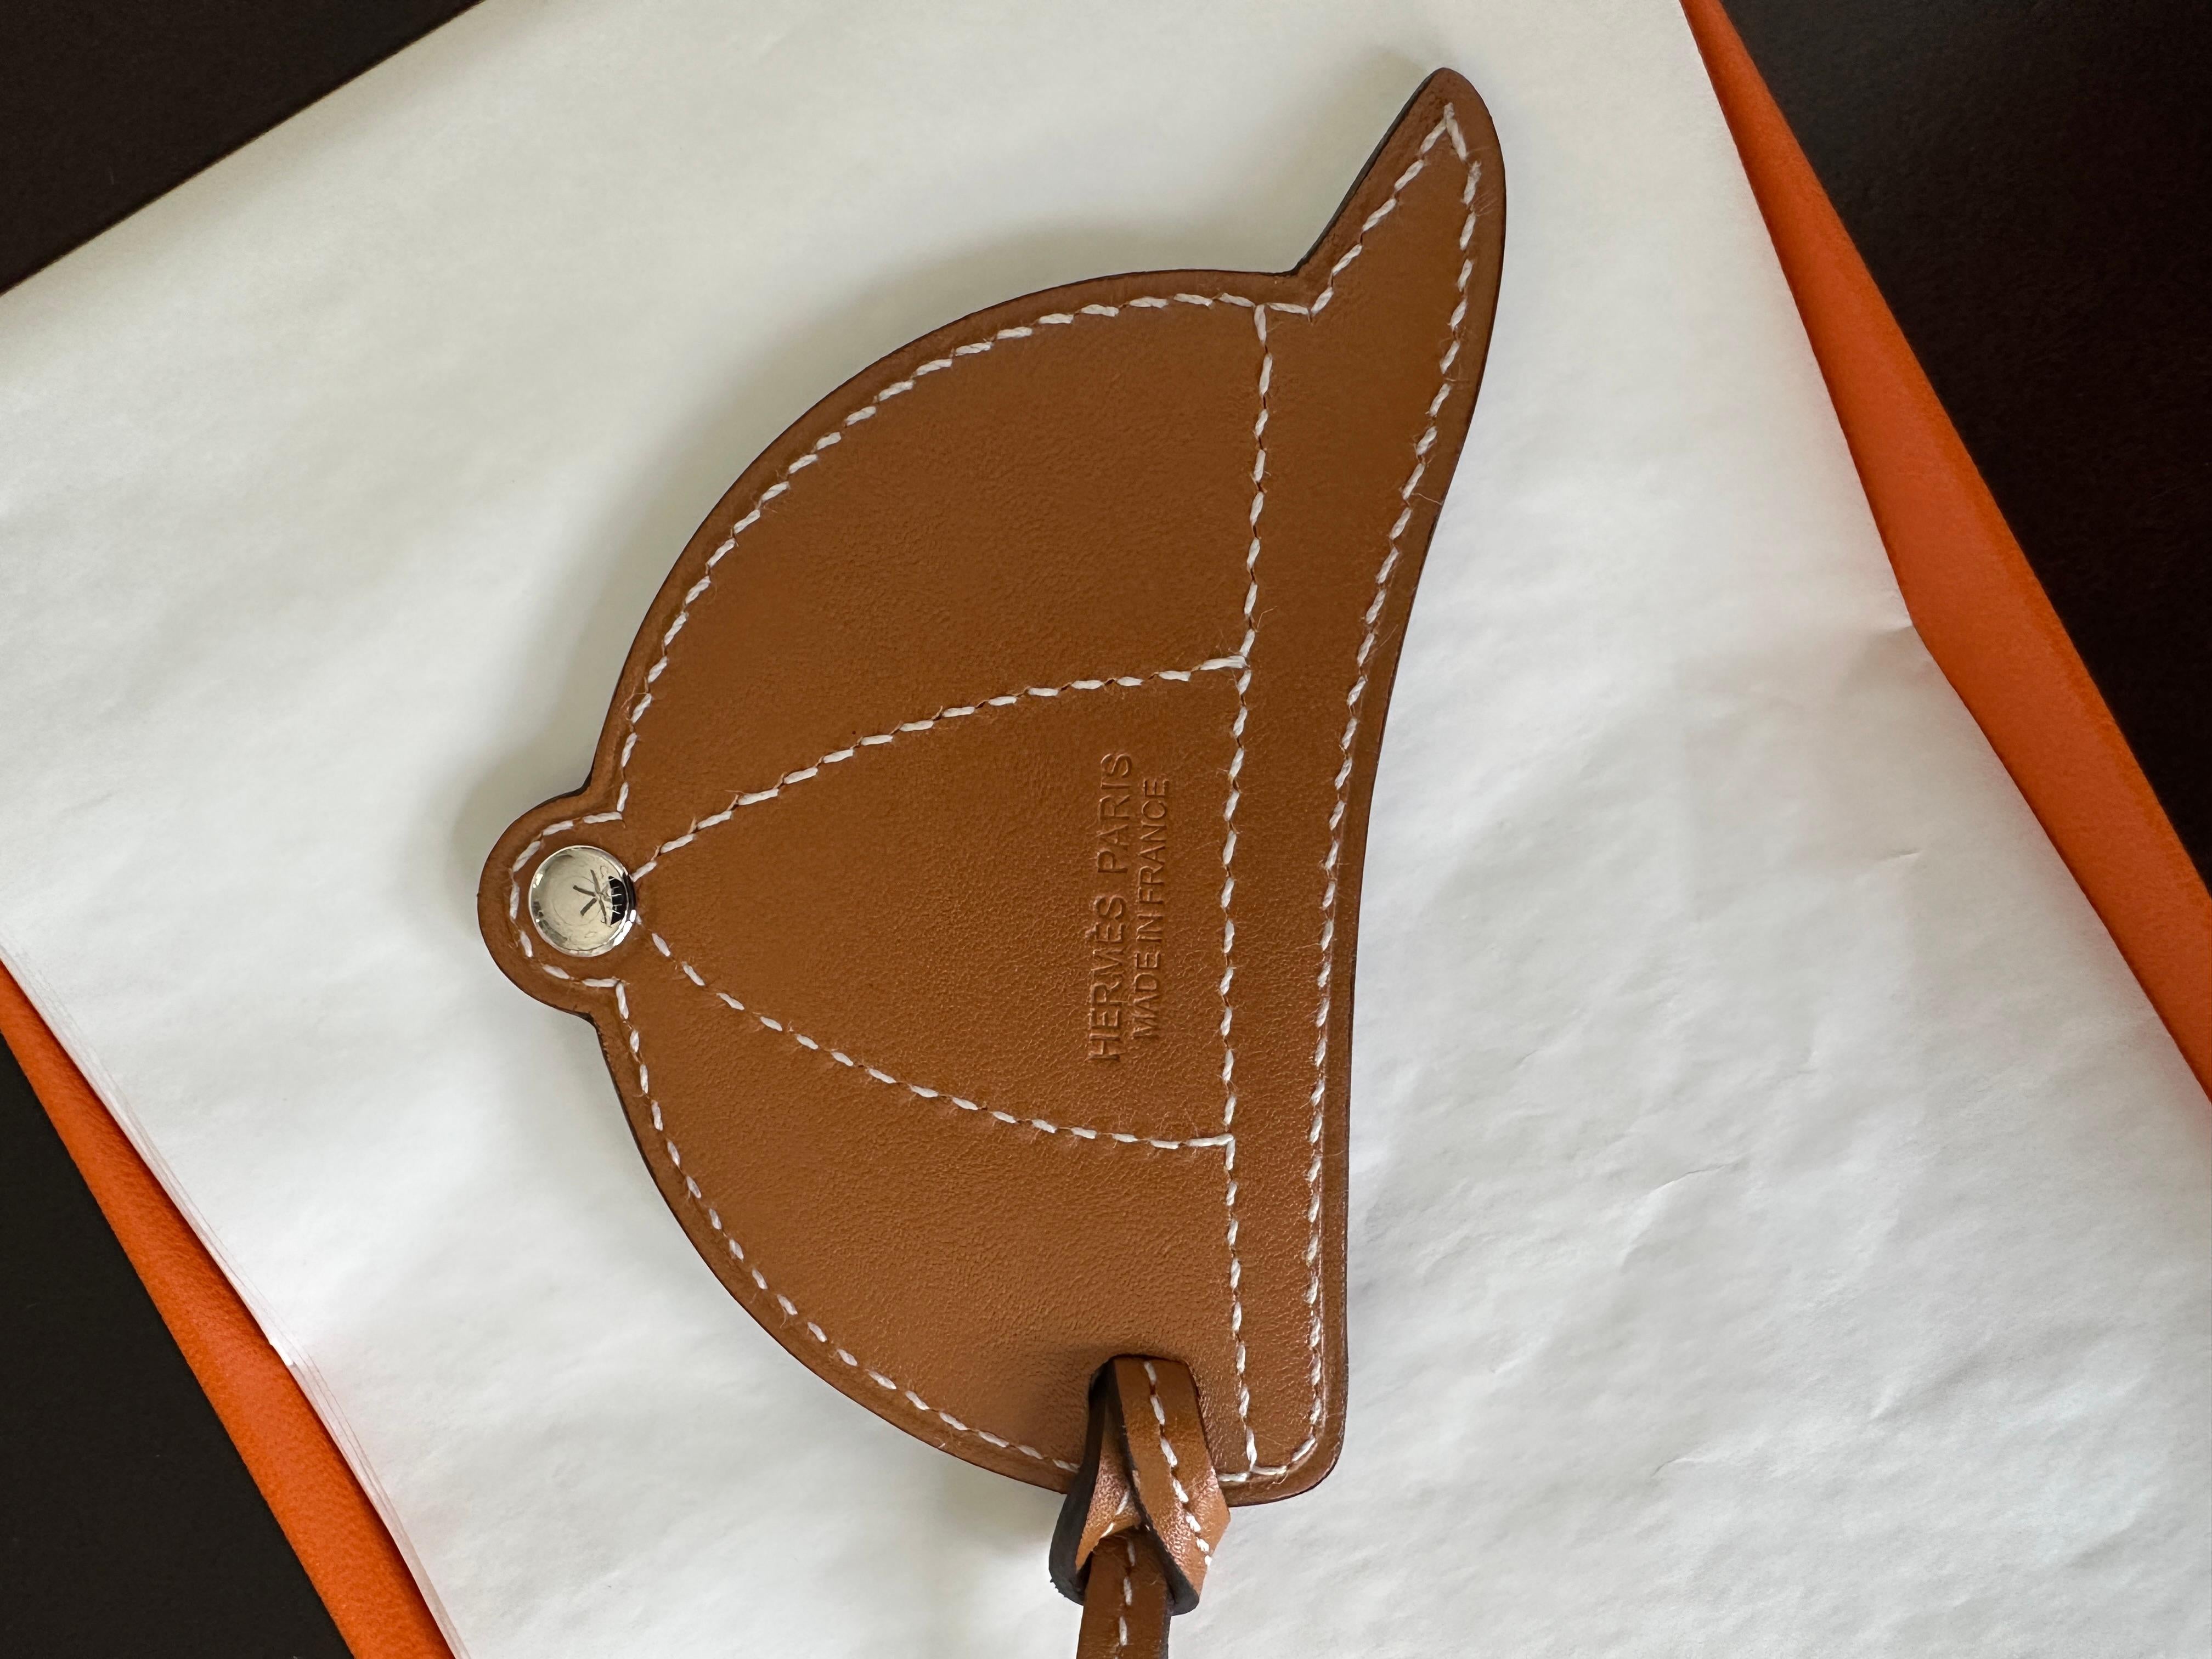 The Paddock Boot Charm
HERMES PADDOCK LEATHER BOOT CHARM
Naturel / Sable / Bleu Zellig
How cute is this!
Equestrian Boot charm in Butler and Swift calfskin with palladium plated buckle
Comes in Hermes Box tissue and ribbon
Retail is $820 plus